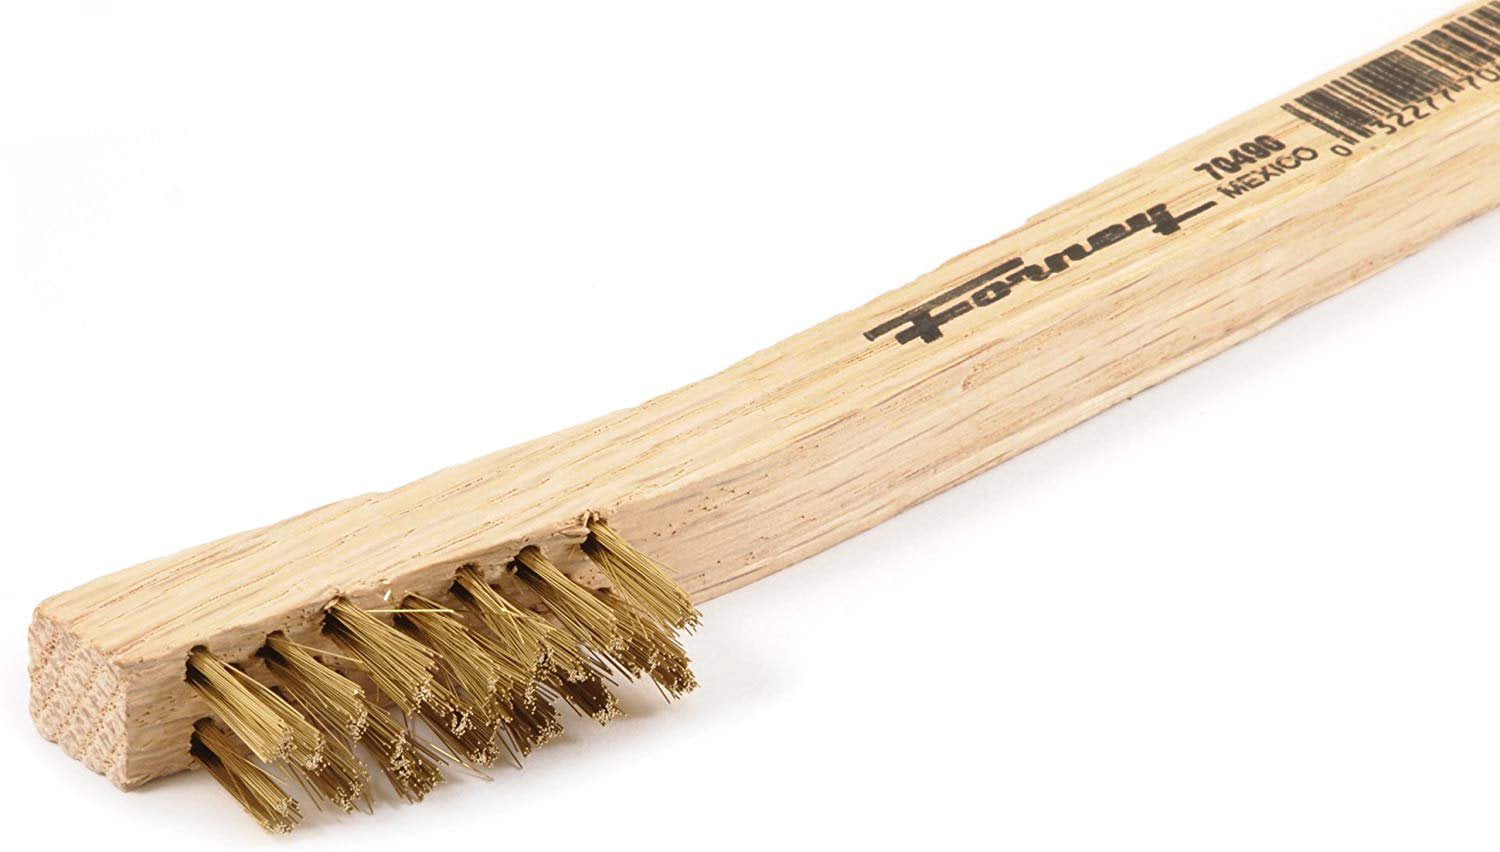 Forney 70490 Brass Wood Handle Scratch Brush 0.006 Wire x 7-3/4 L in. 